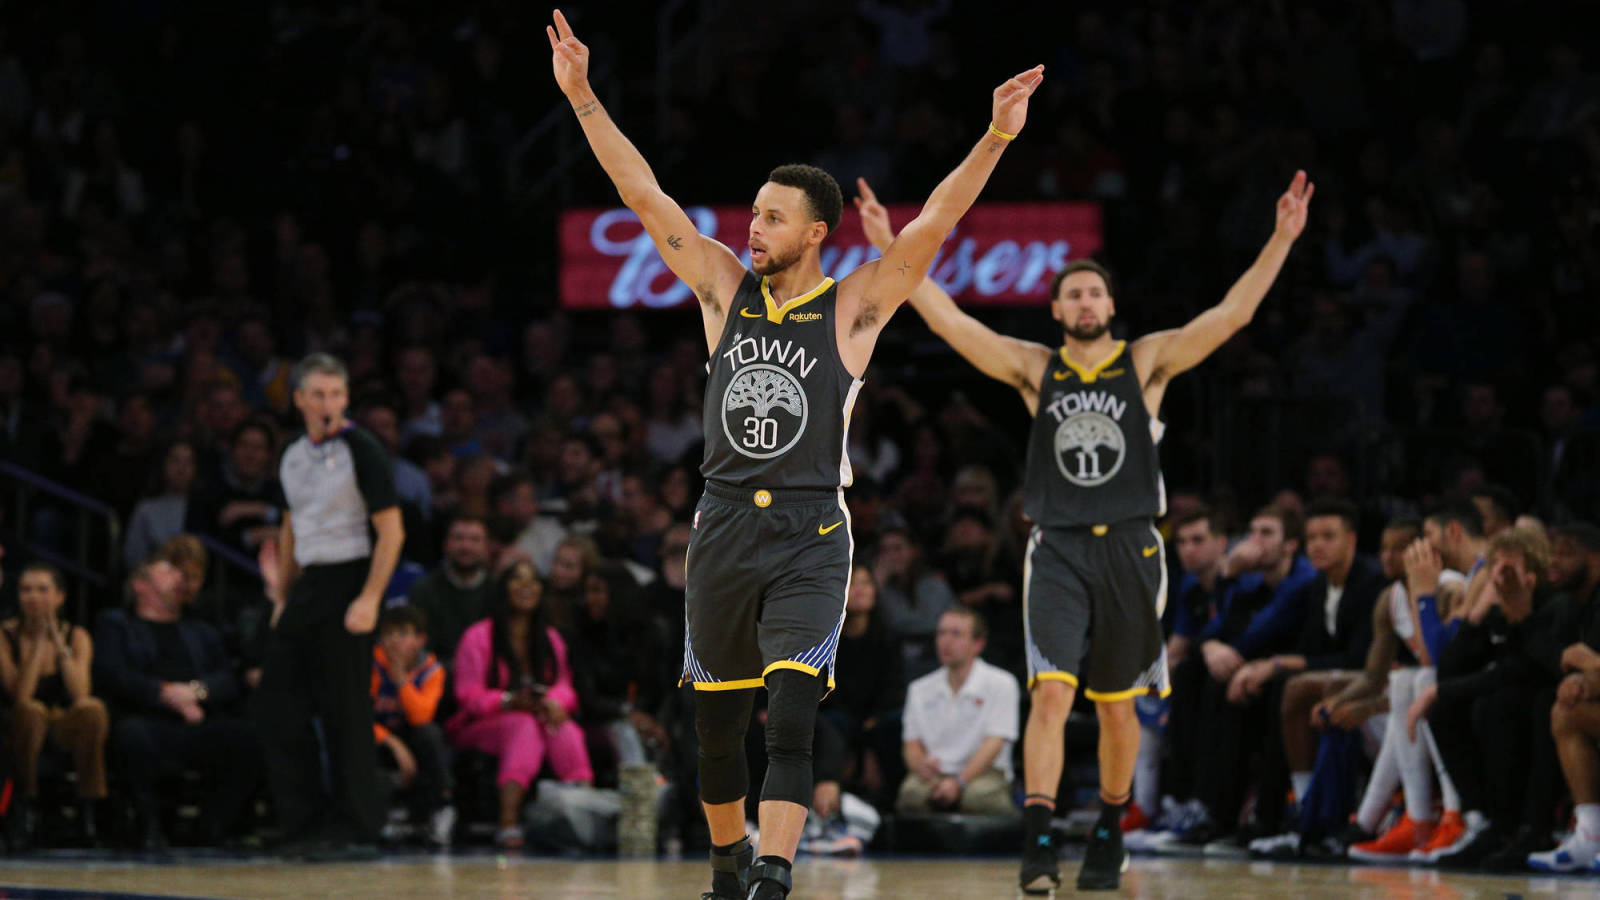 Steph Curry wanted Klay Thompson to break his record